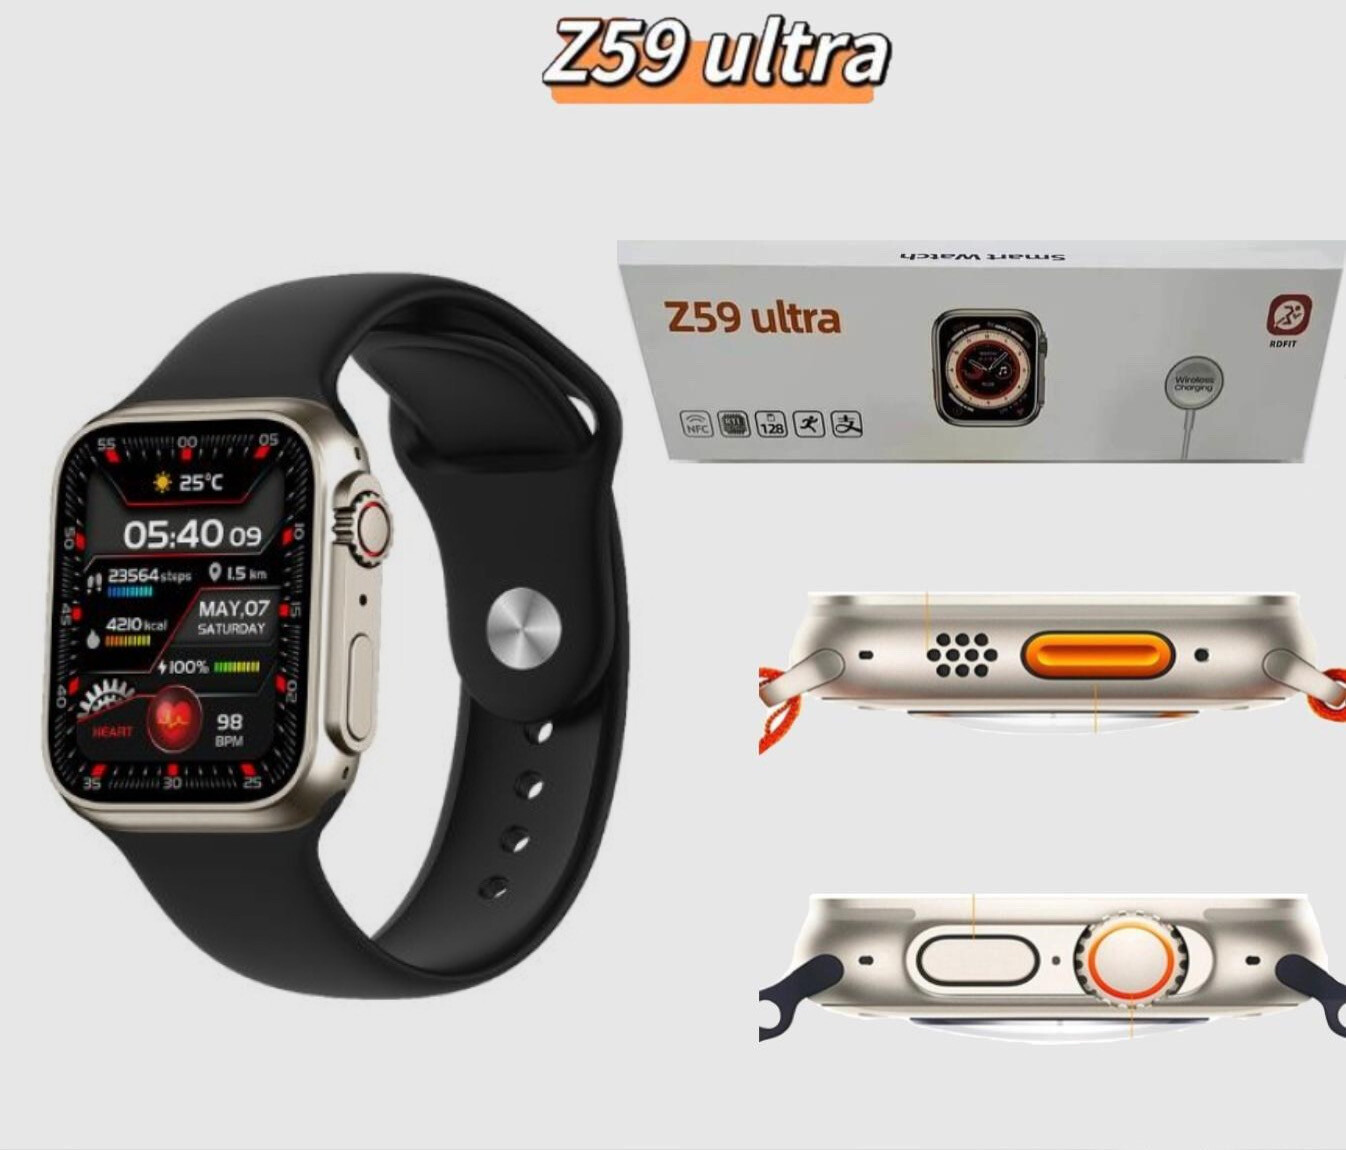 Z59 Ultra watch (watch size 45)
Connect , wallpapers from the phone notifications feature nfc wireless charging
REDFIT program